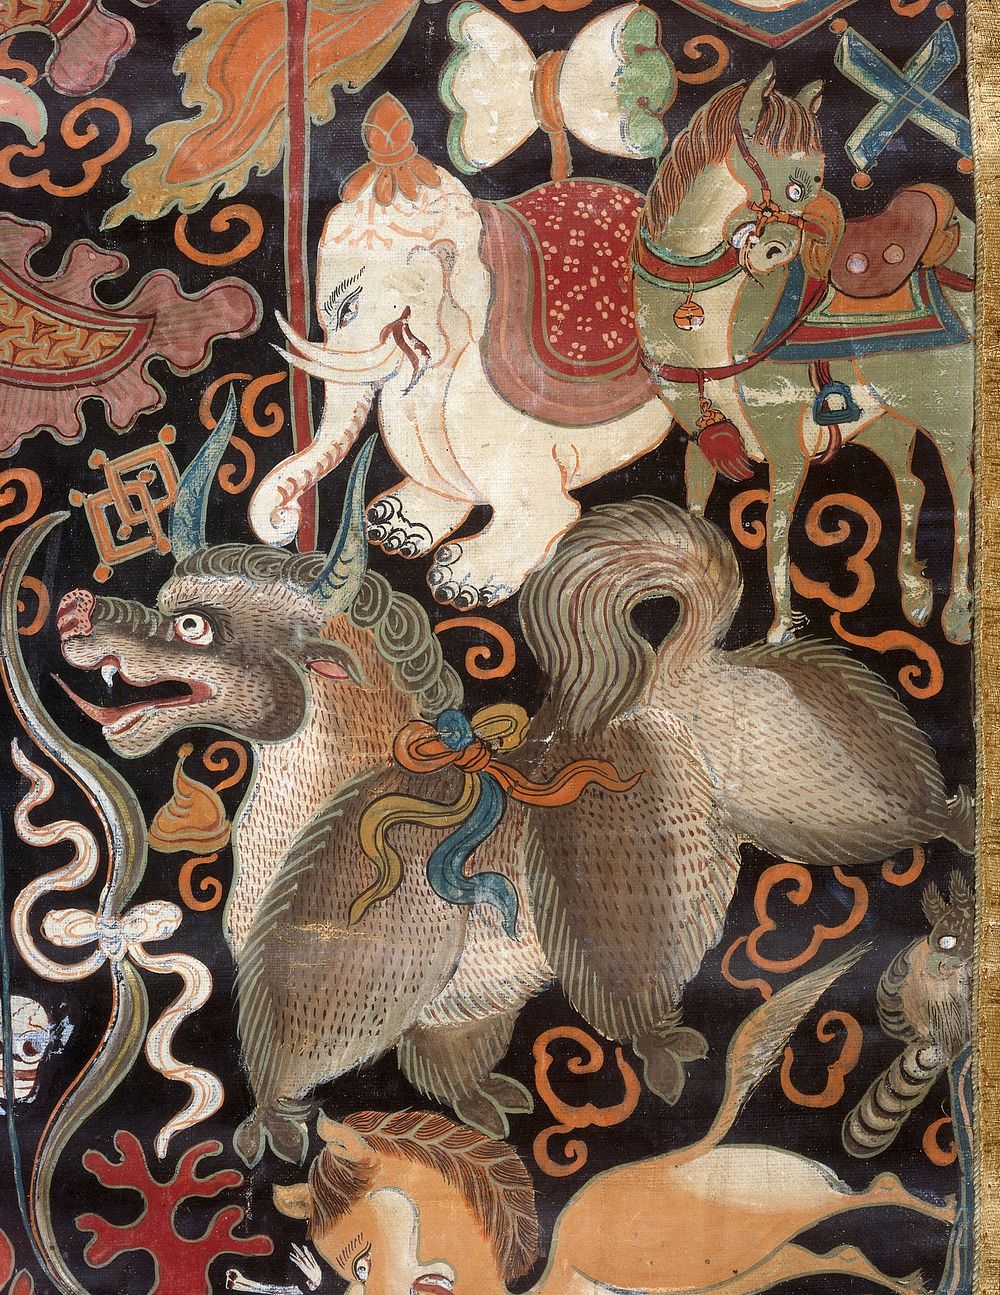 Attributes of Beg-tse in a "rgyan tshogs" banner. Distemper painting by a Tibetan painter.